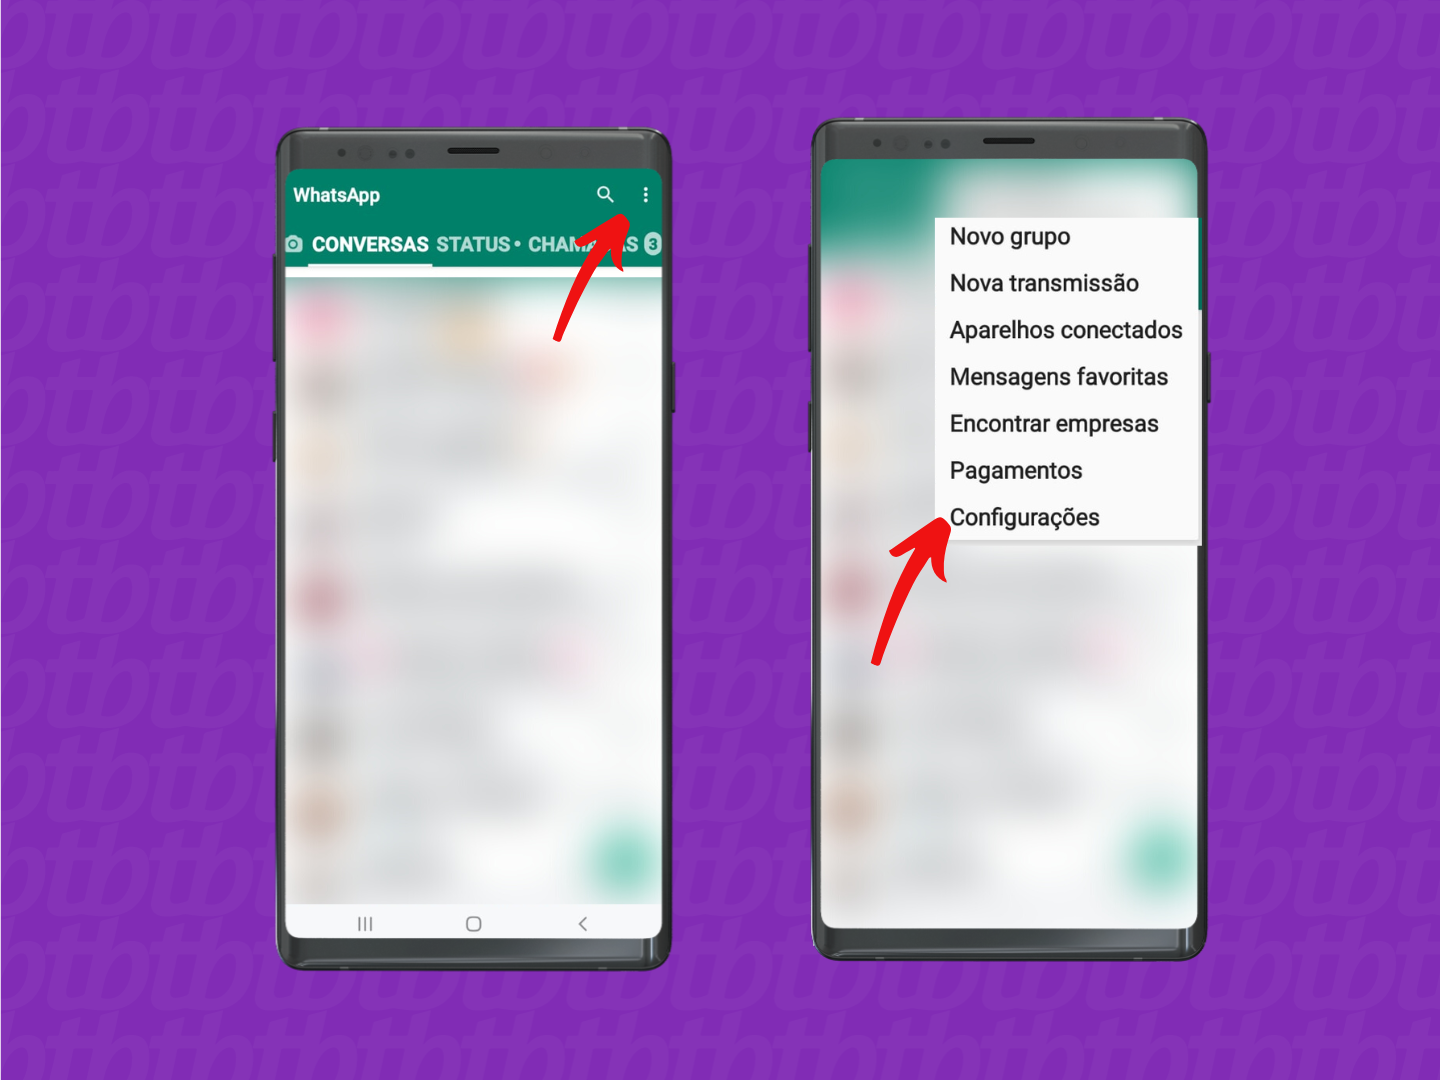 How to access settings in WhatsApp